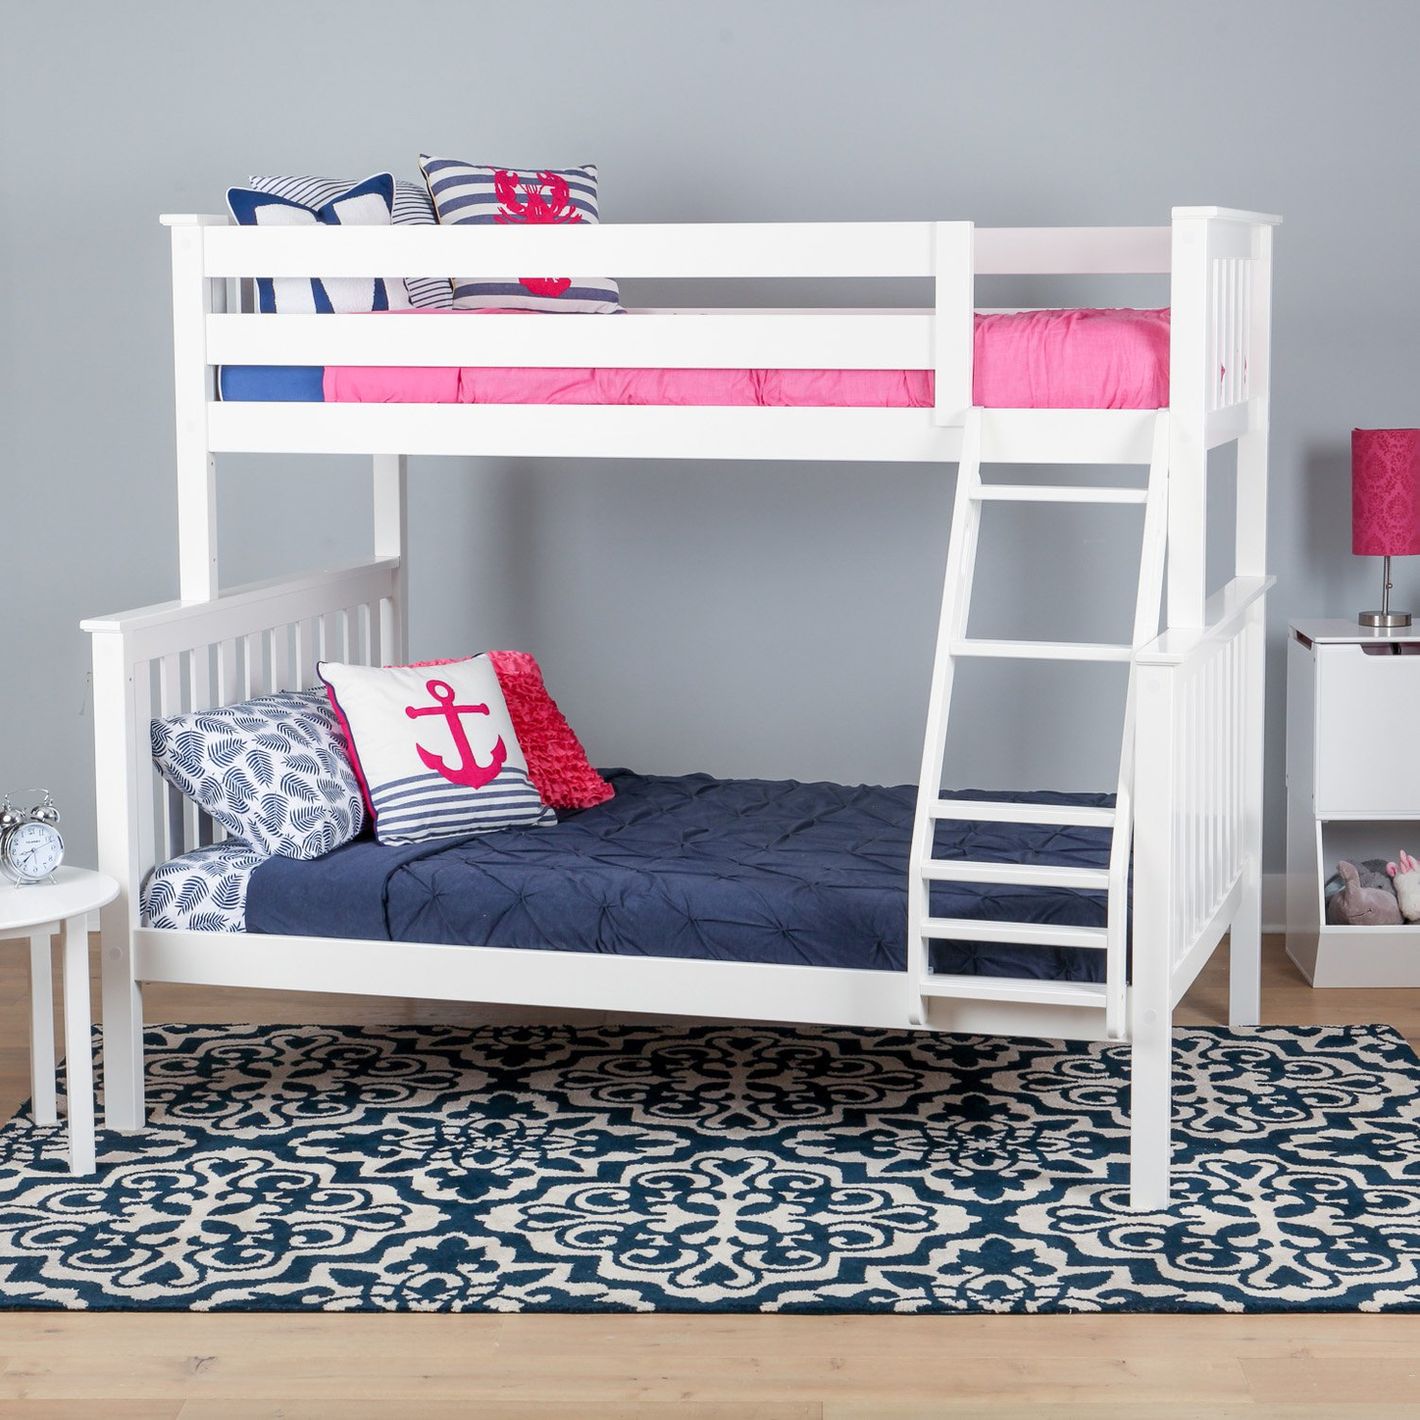 12 Best Twin Beds For Kids 2019, Twin Bed Frame For Little Girl